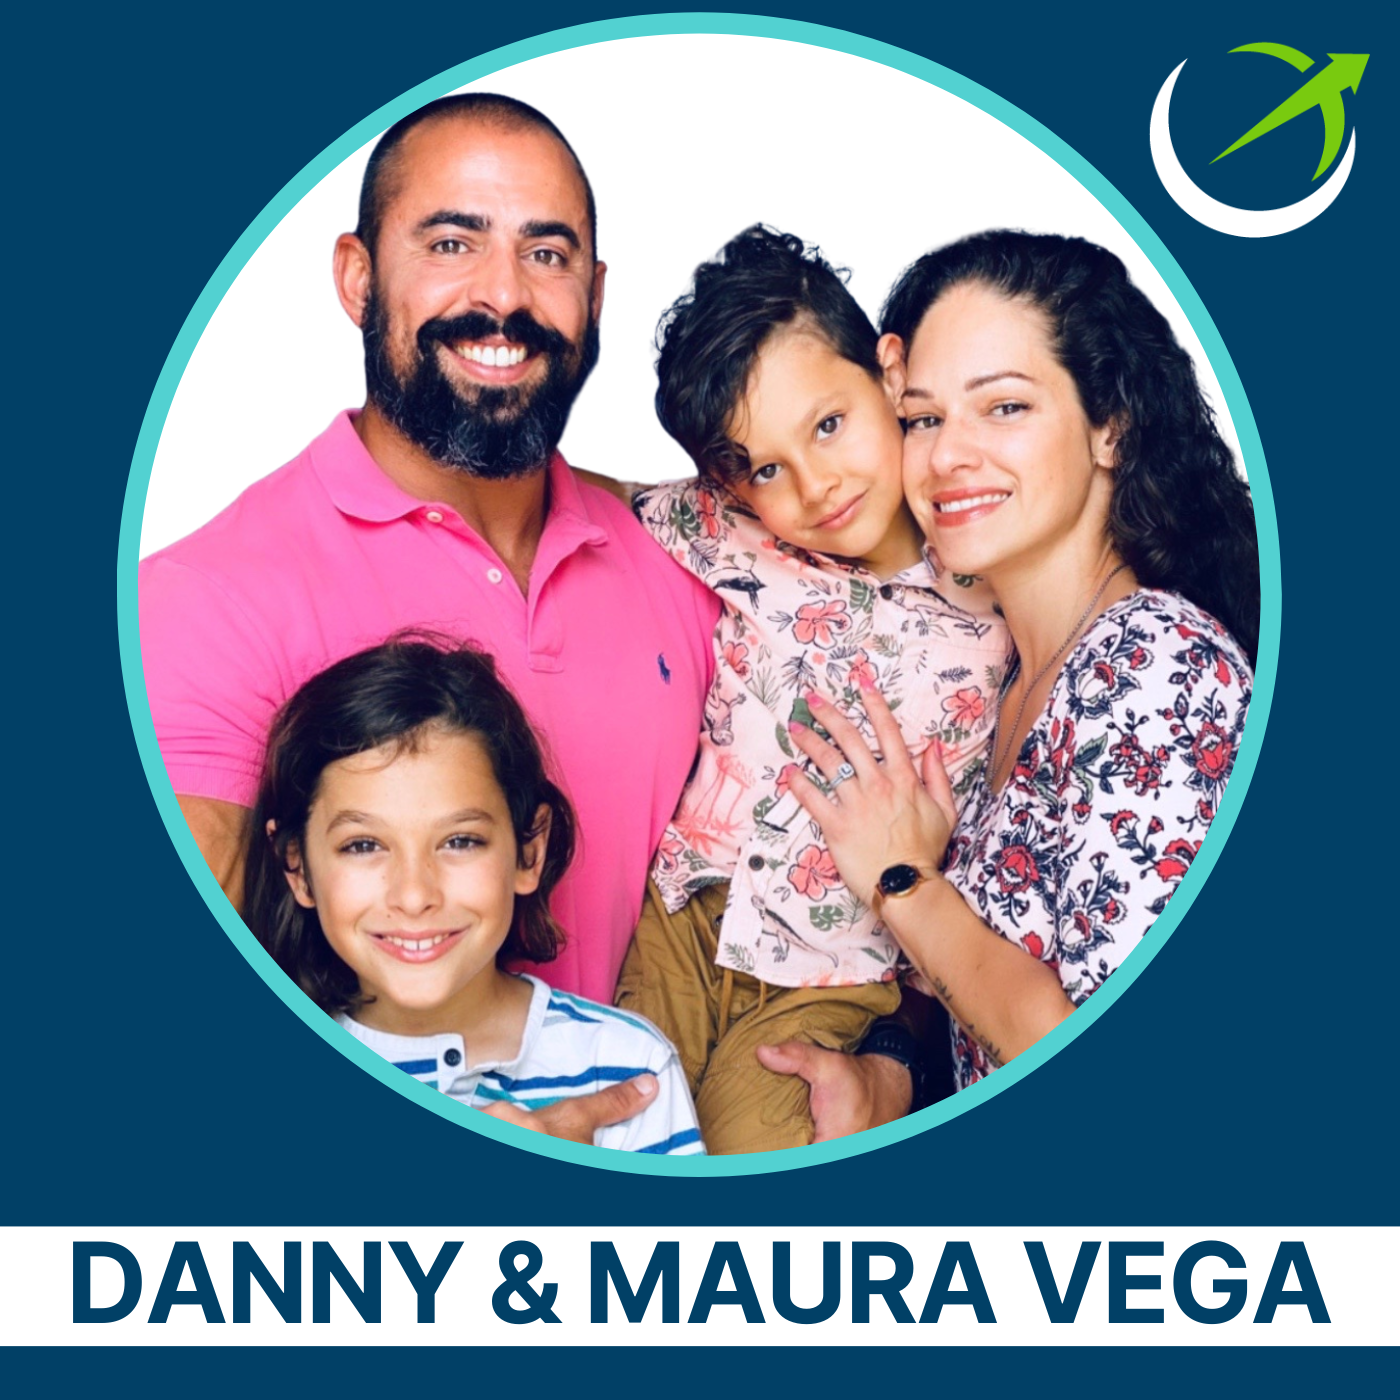 The “Fat Fueled Family”, Unschooling How-To’s, Montessori Education, Does Spanking Damage The Brain, Rites Of Passage With Danny Vega (Boundless Parenting Book Series)